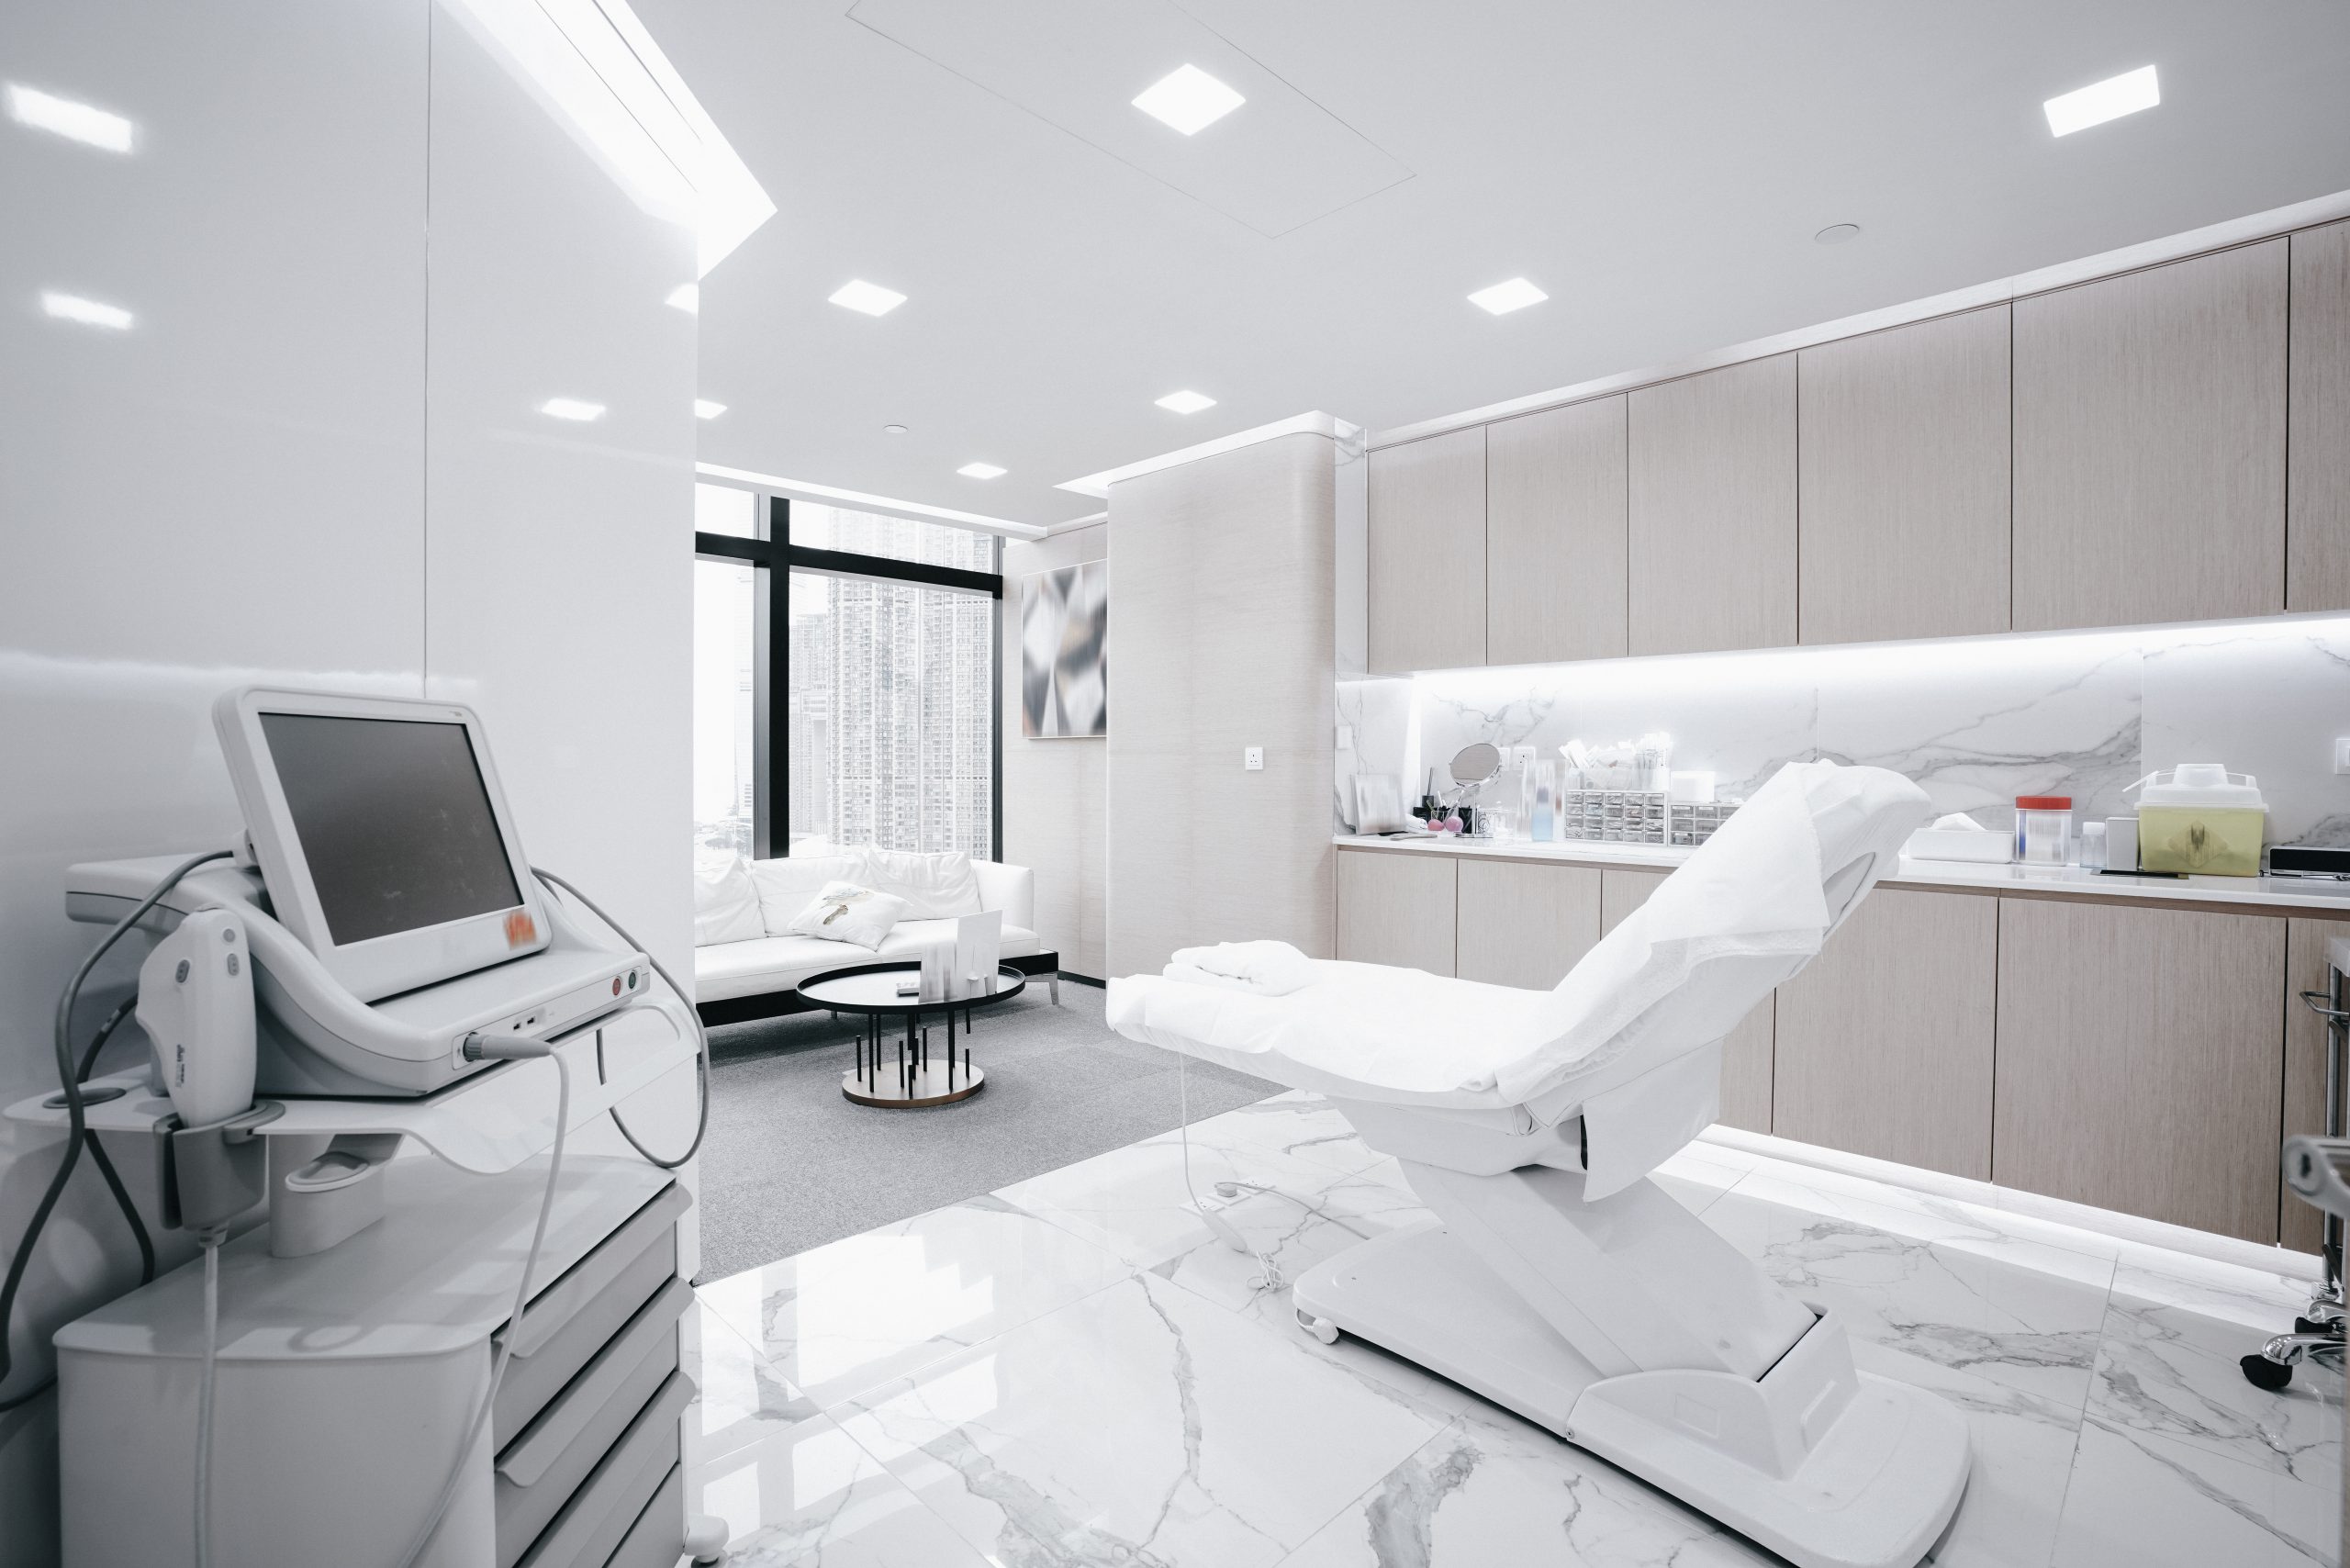 6-medical-clinic-interior-design-ideas-for-comfort-beauty